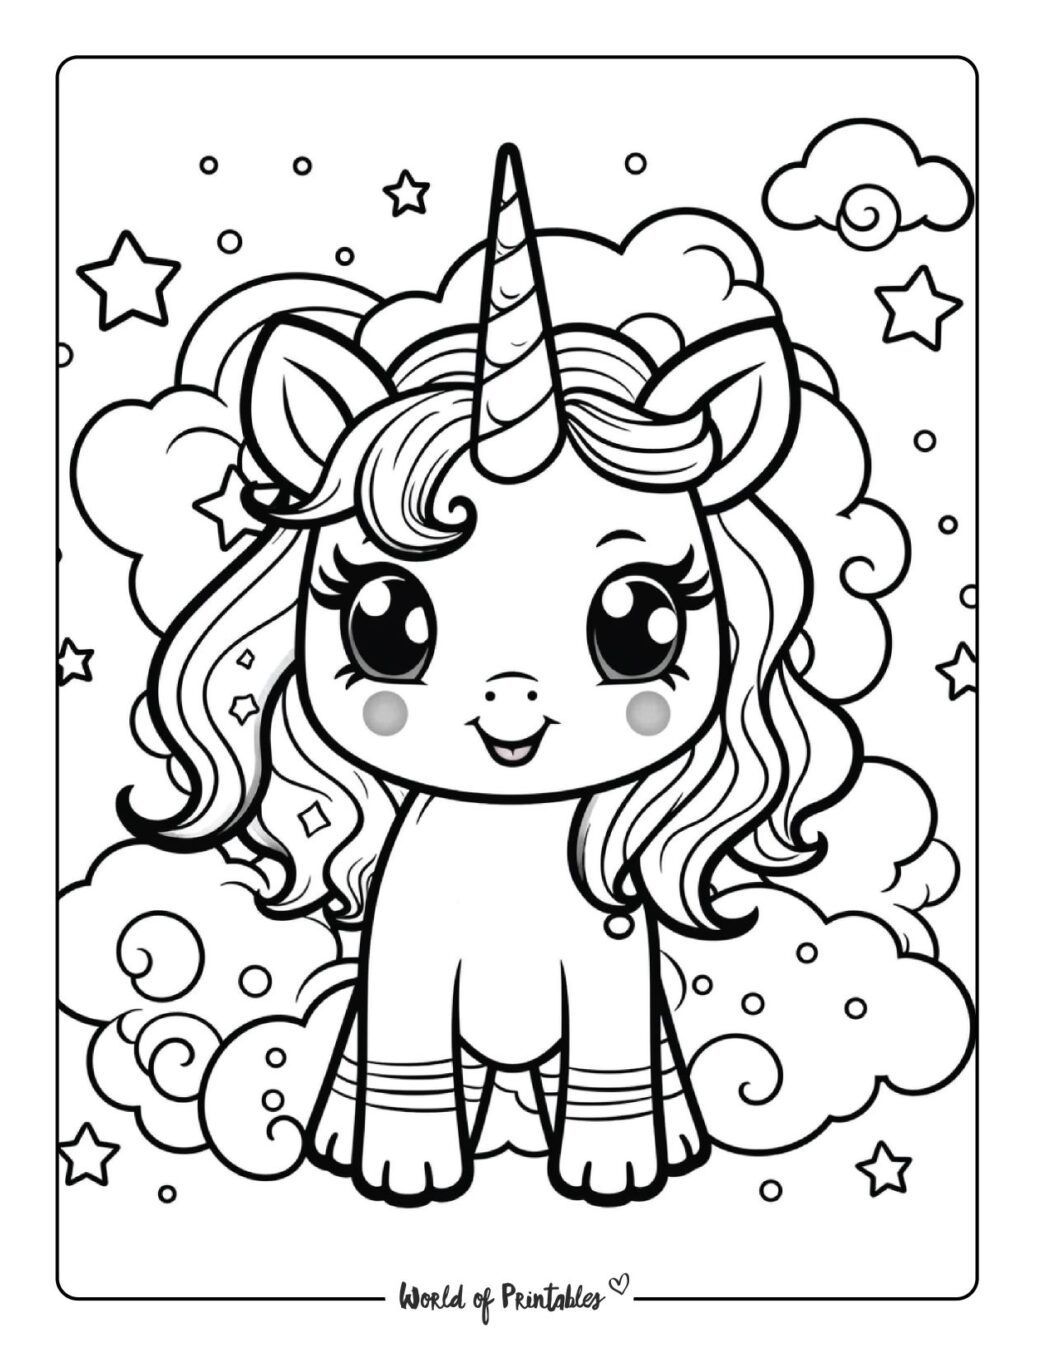 The Best Unicorn Coloring Pages For Kids & Adults